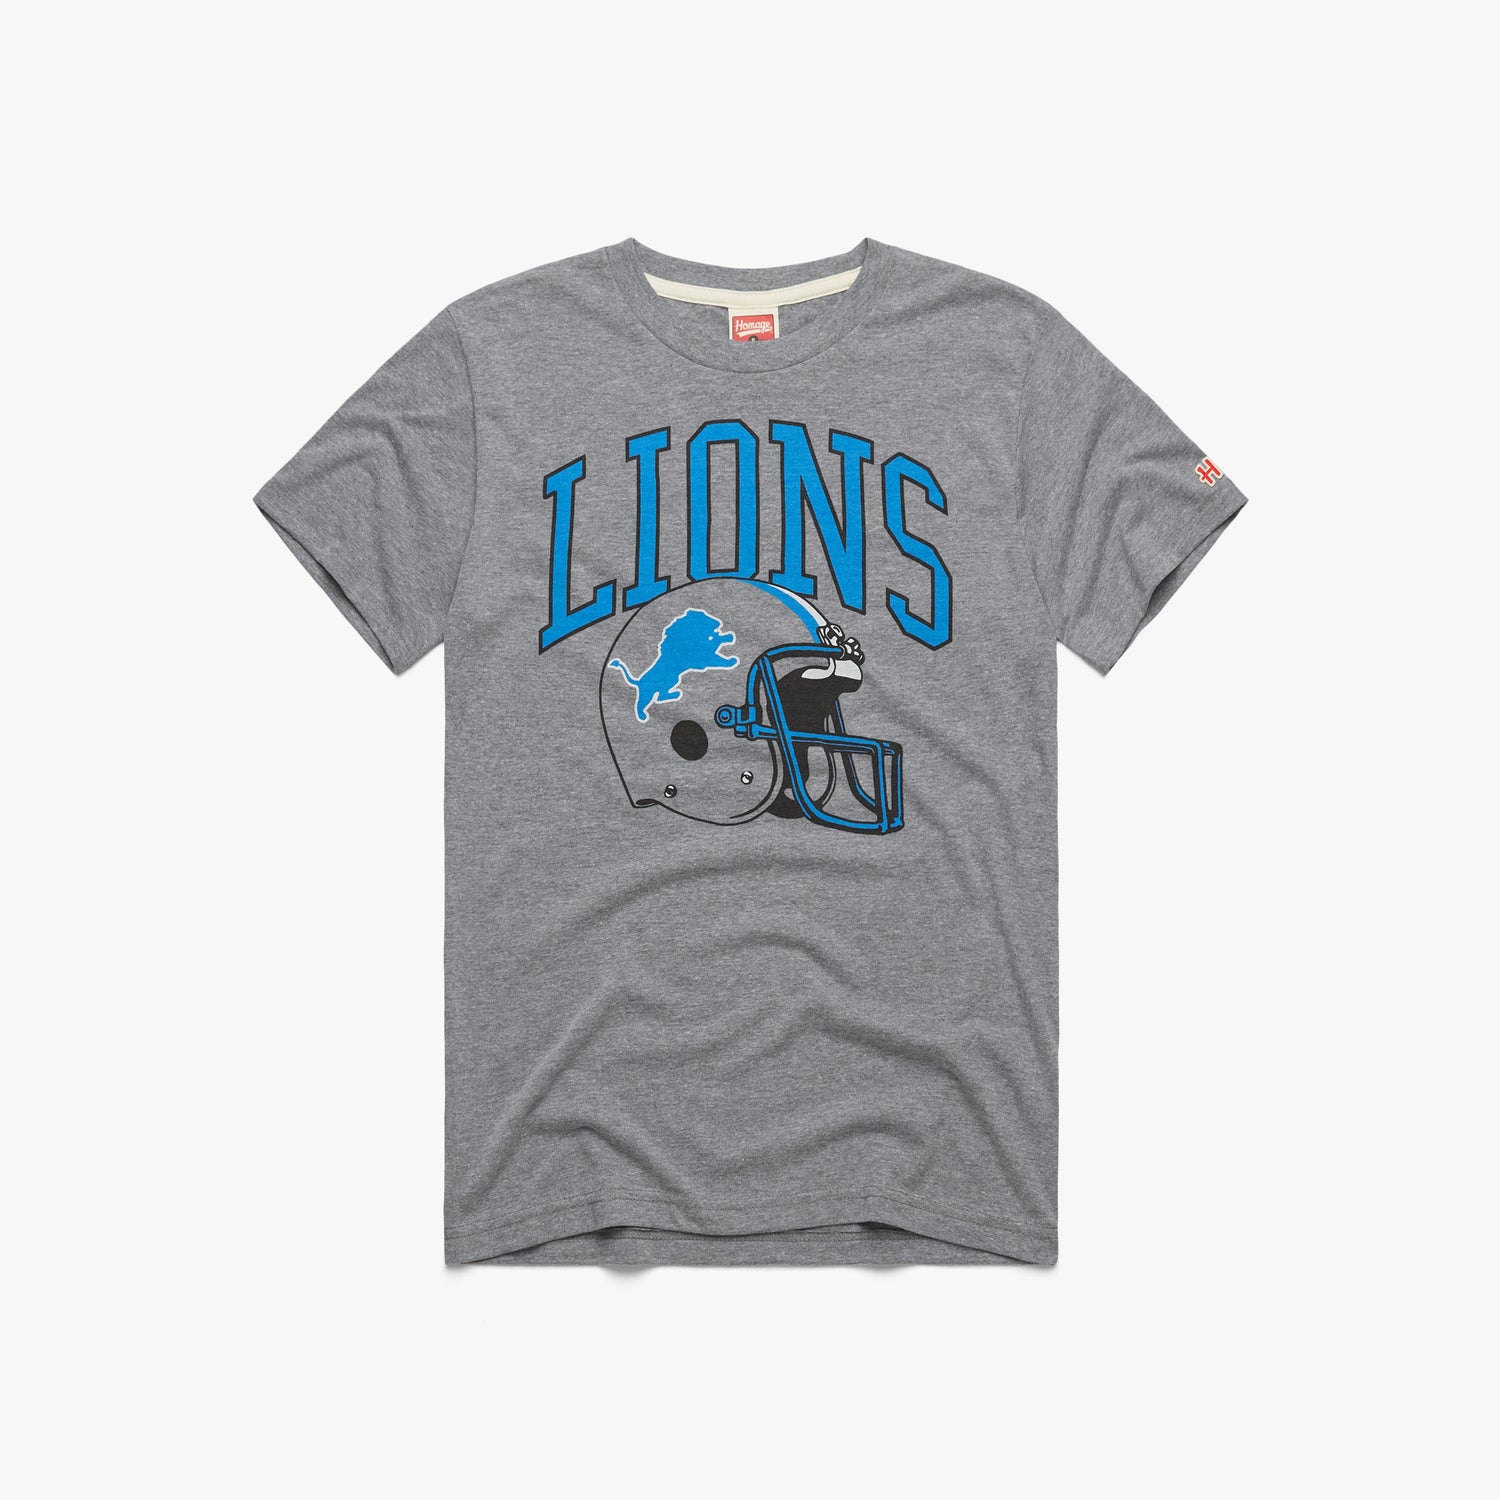 Detroit Lions Helmet Retro T-Shirt from Homage. | Officially Licensed Vintage NFL Apparel from Homage Pro Shop.